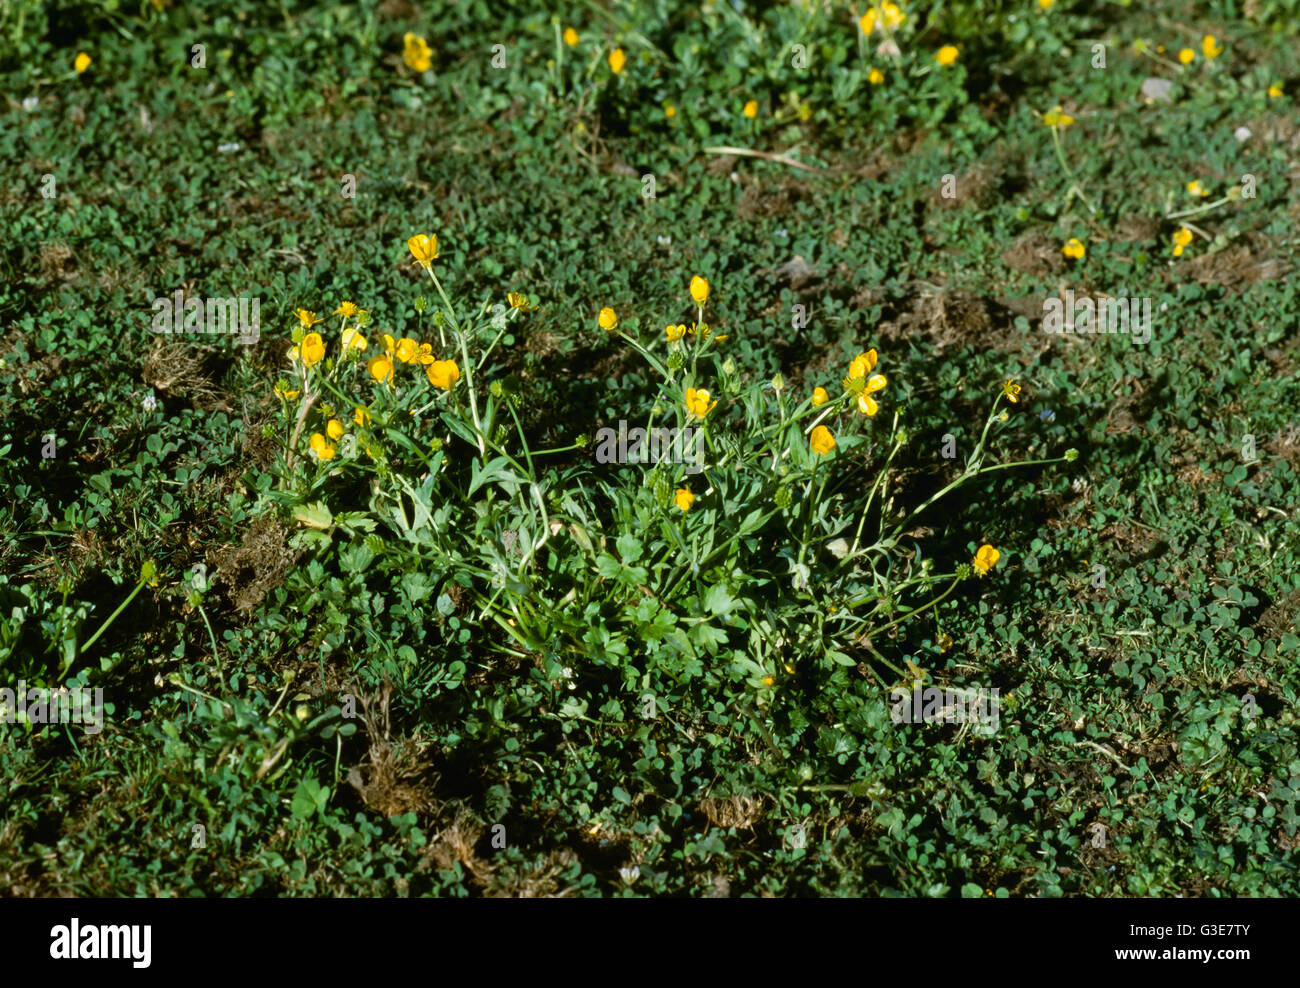 Agriculture - Weeds, Hairy Buttercup (Ranunculus sardous), flowering plant / California, USA. Stock Photo